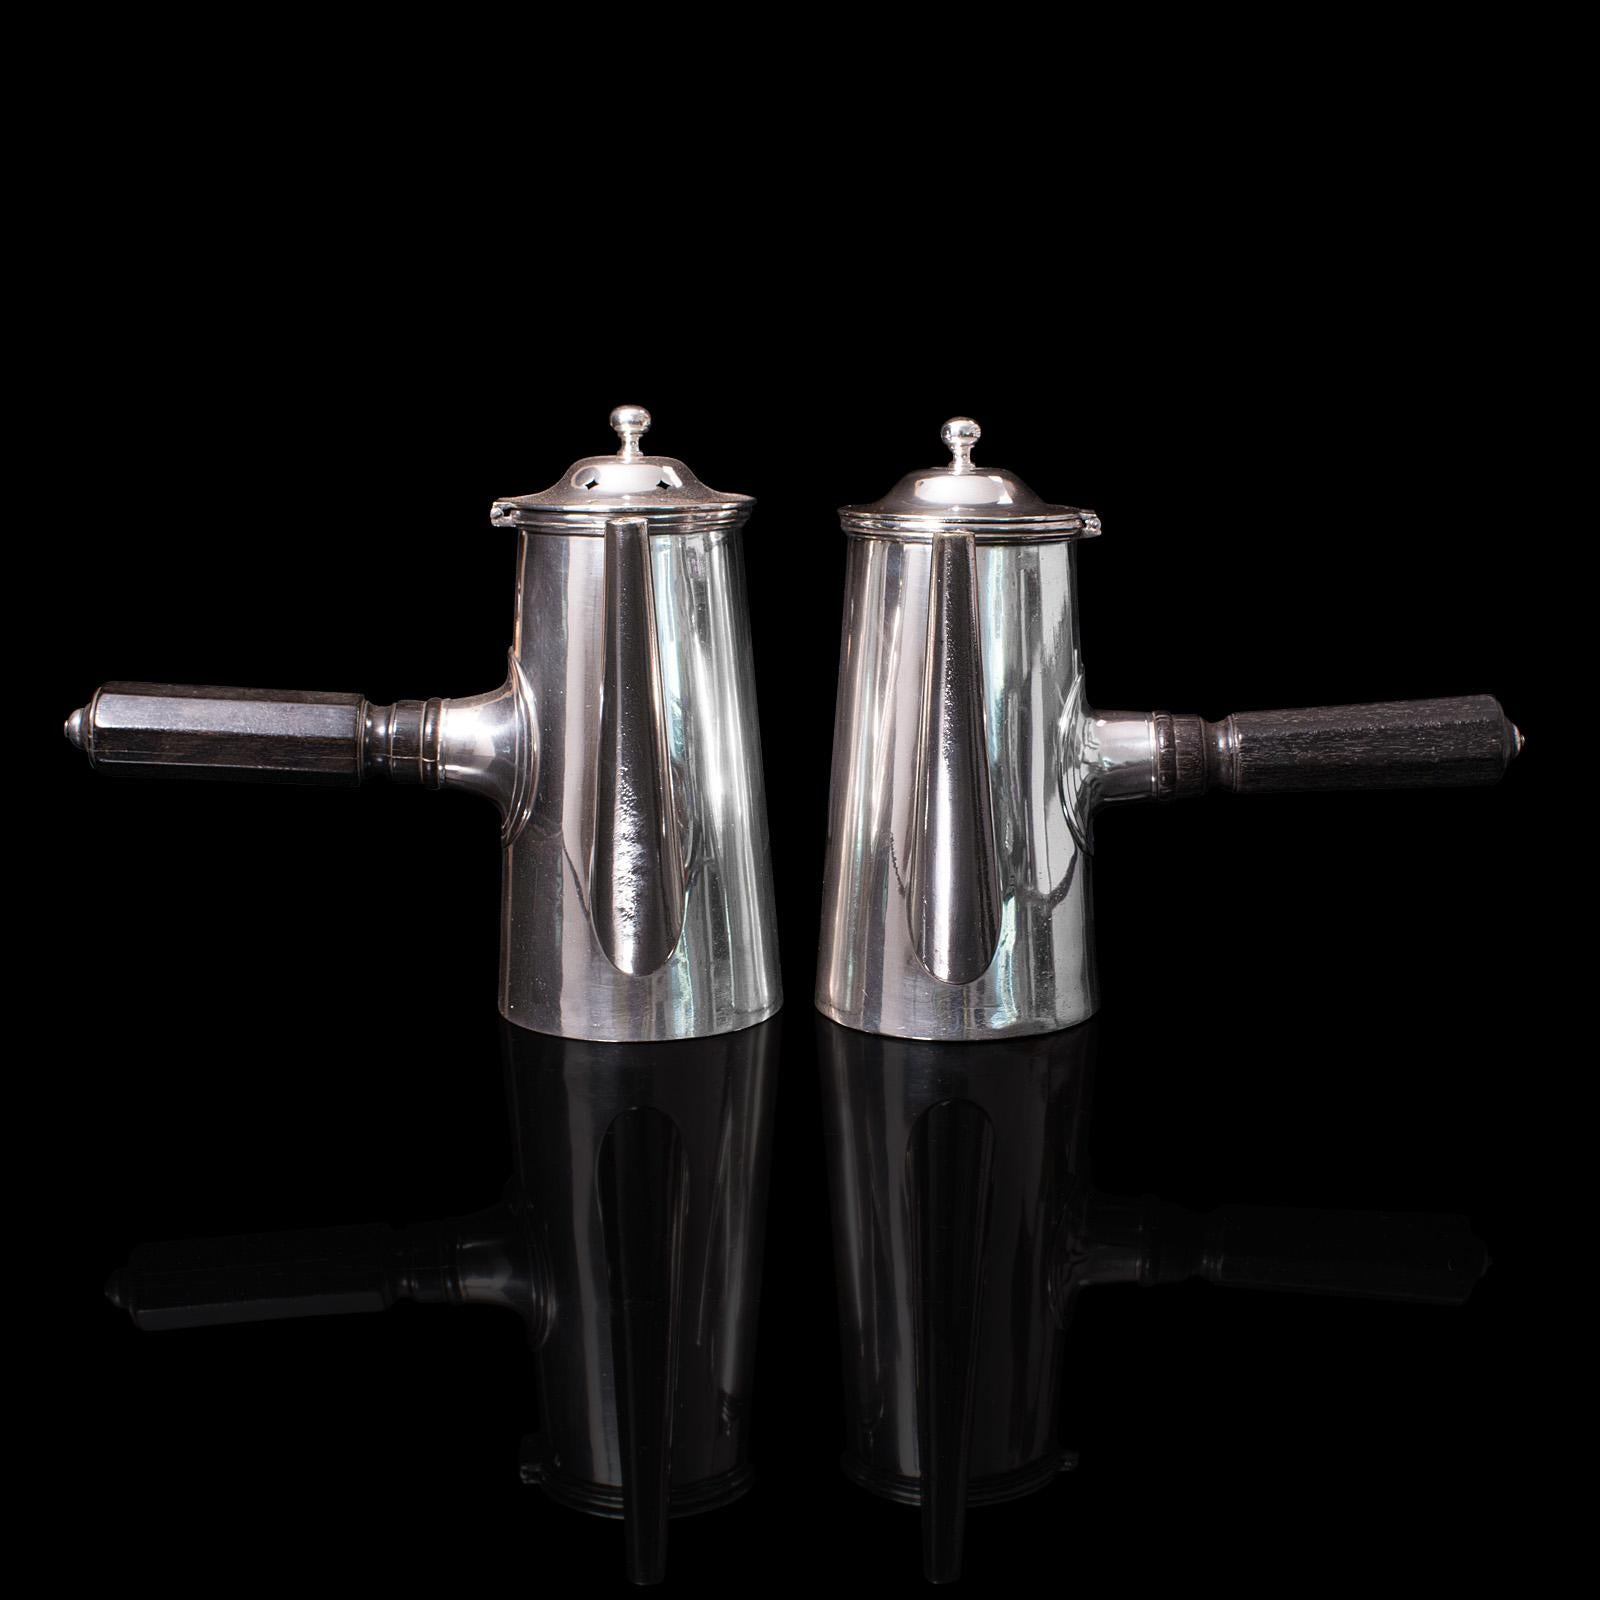 This is a matched pair of vintage coffee pots. An English, silver plated chocolate heating jug by Mappin & Webb, circa 1940.

Superb 2 pint specimens, as good to use today as 80 years ago
Displays a desirable aged patina and in good